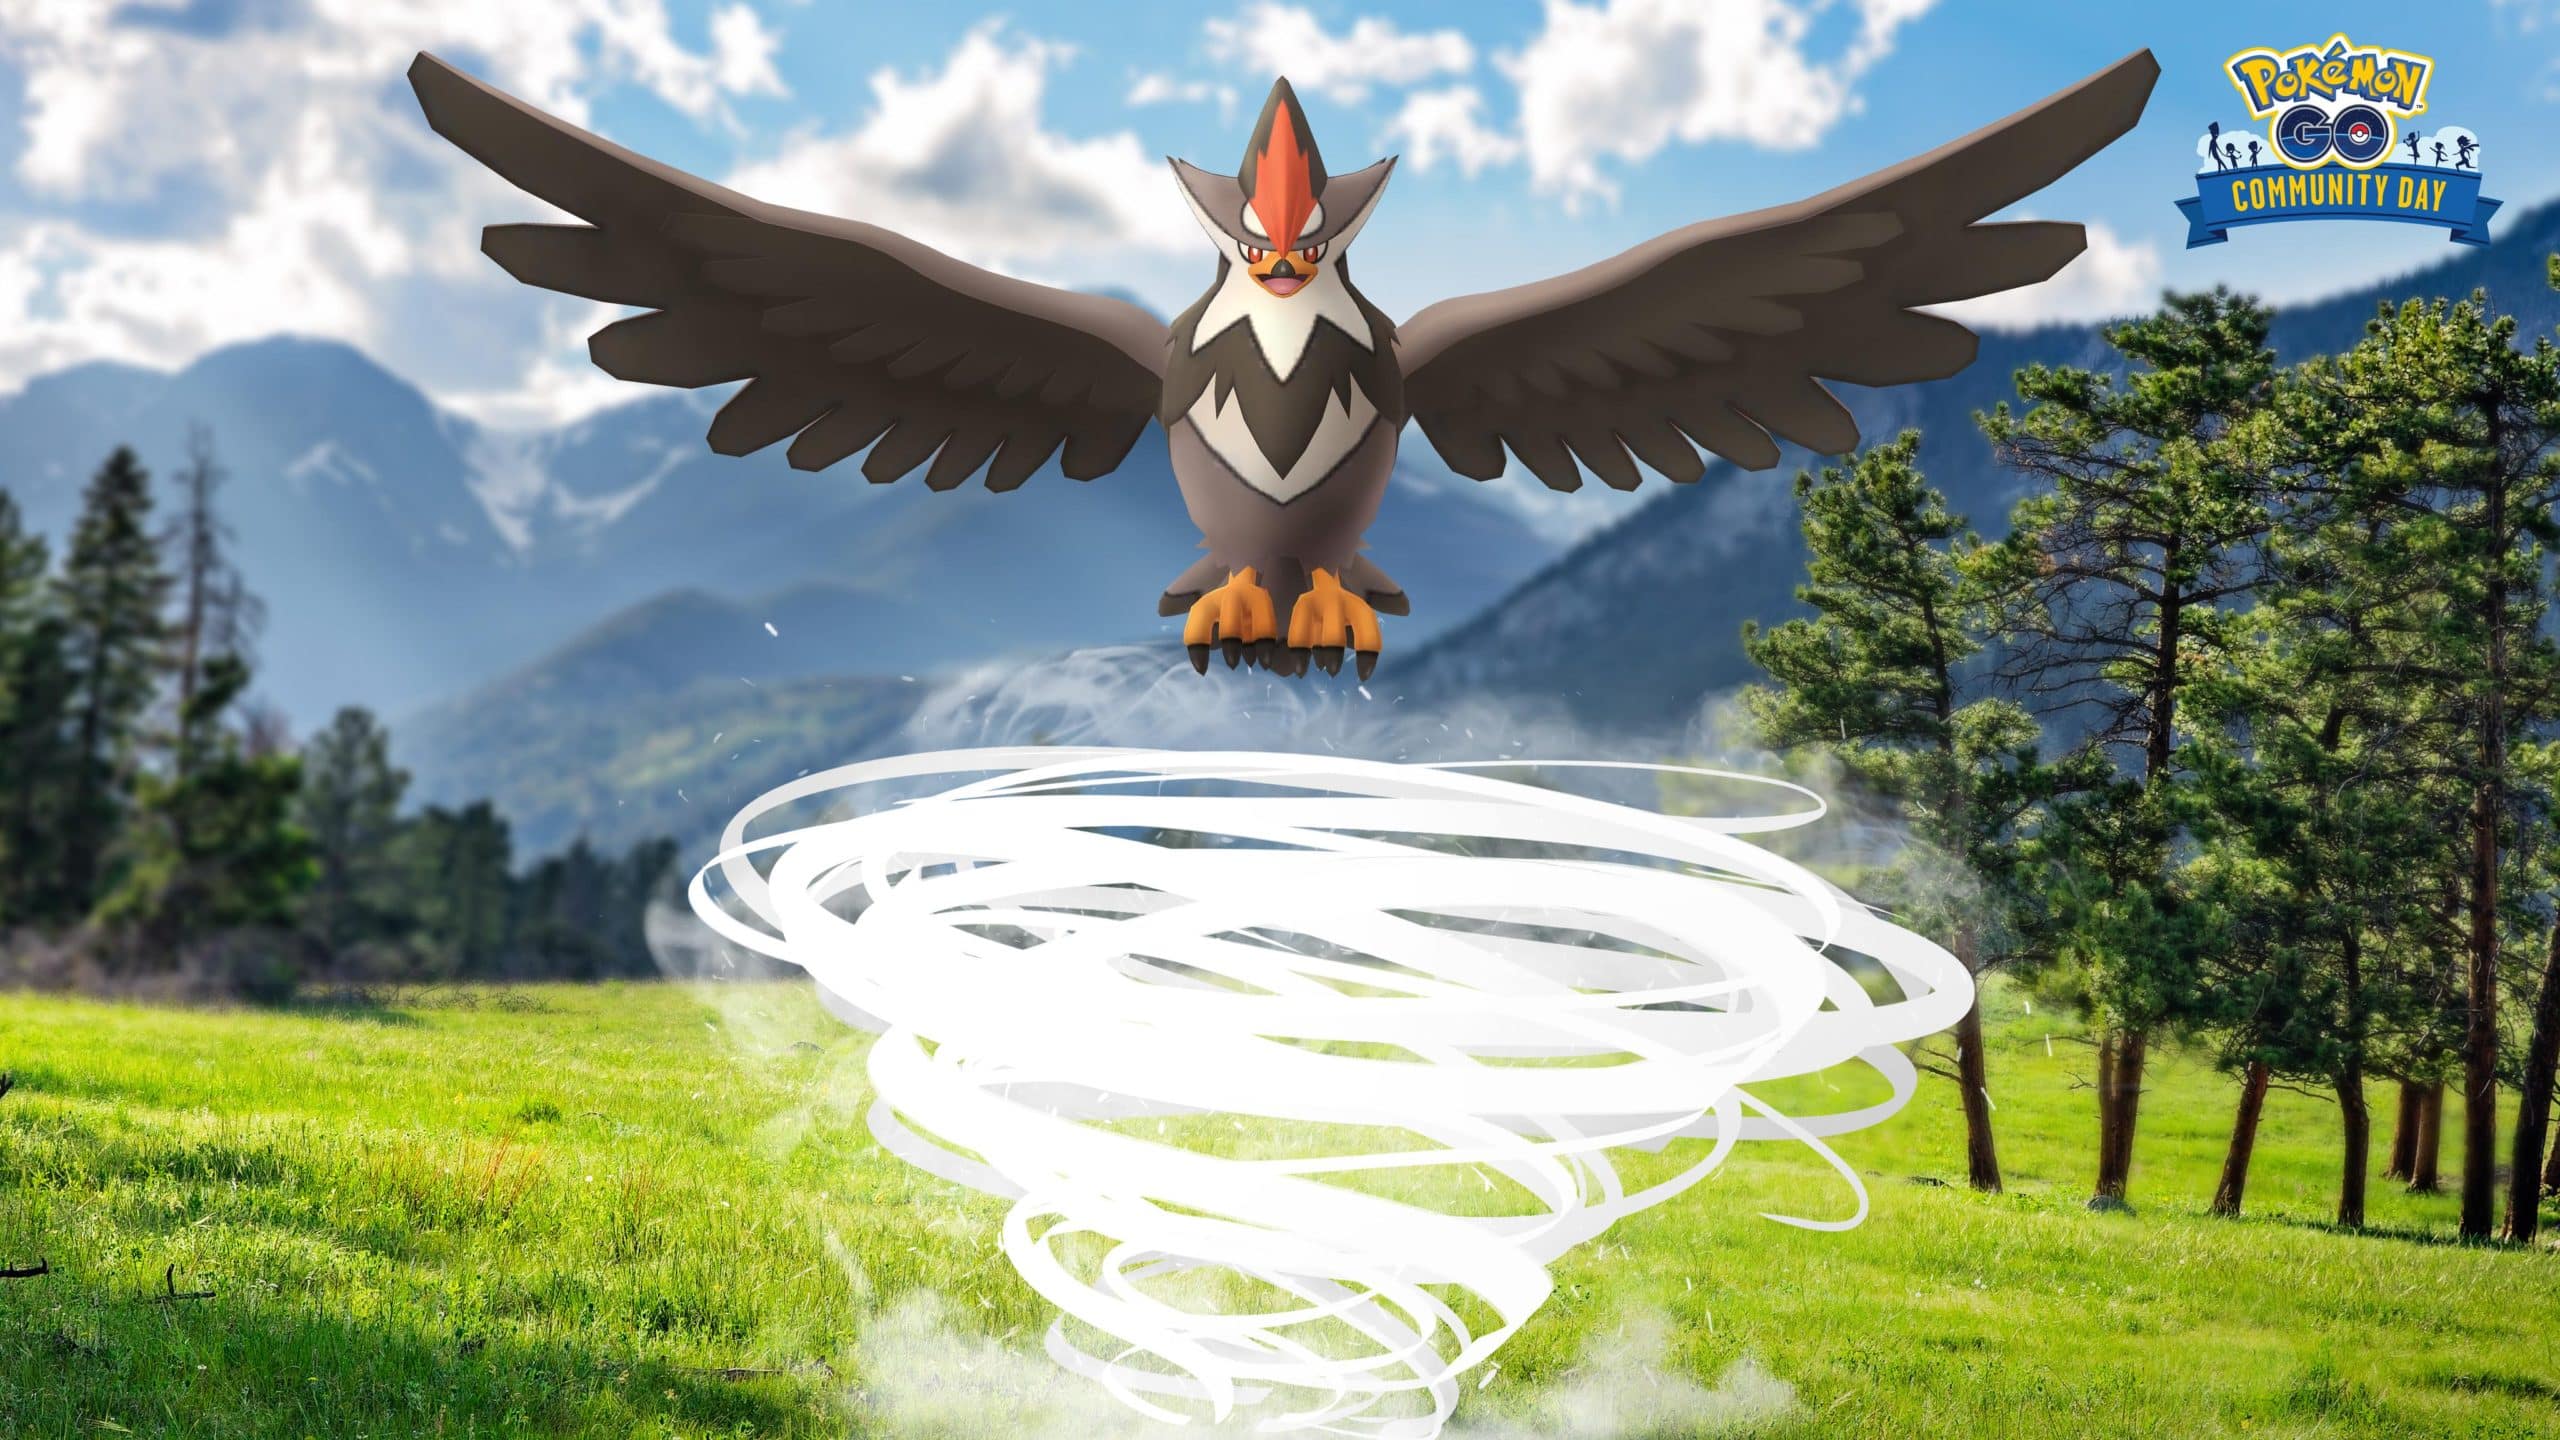 All Pokémon that can learn the move fly without being of the flying type. :  r/pokemon